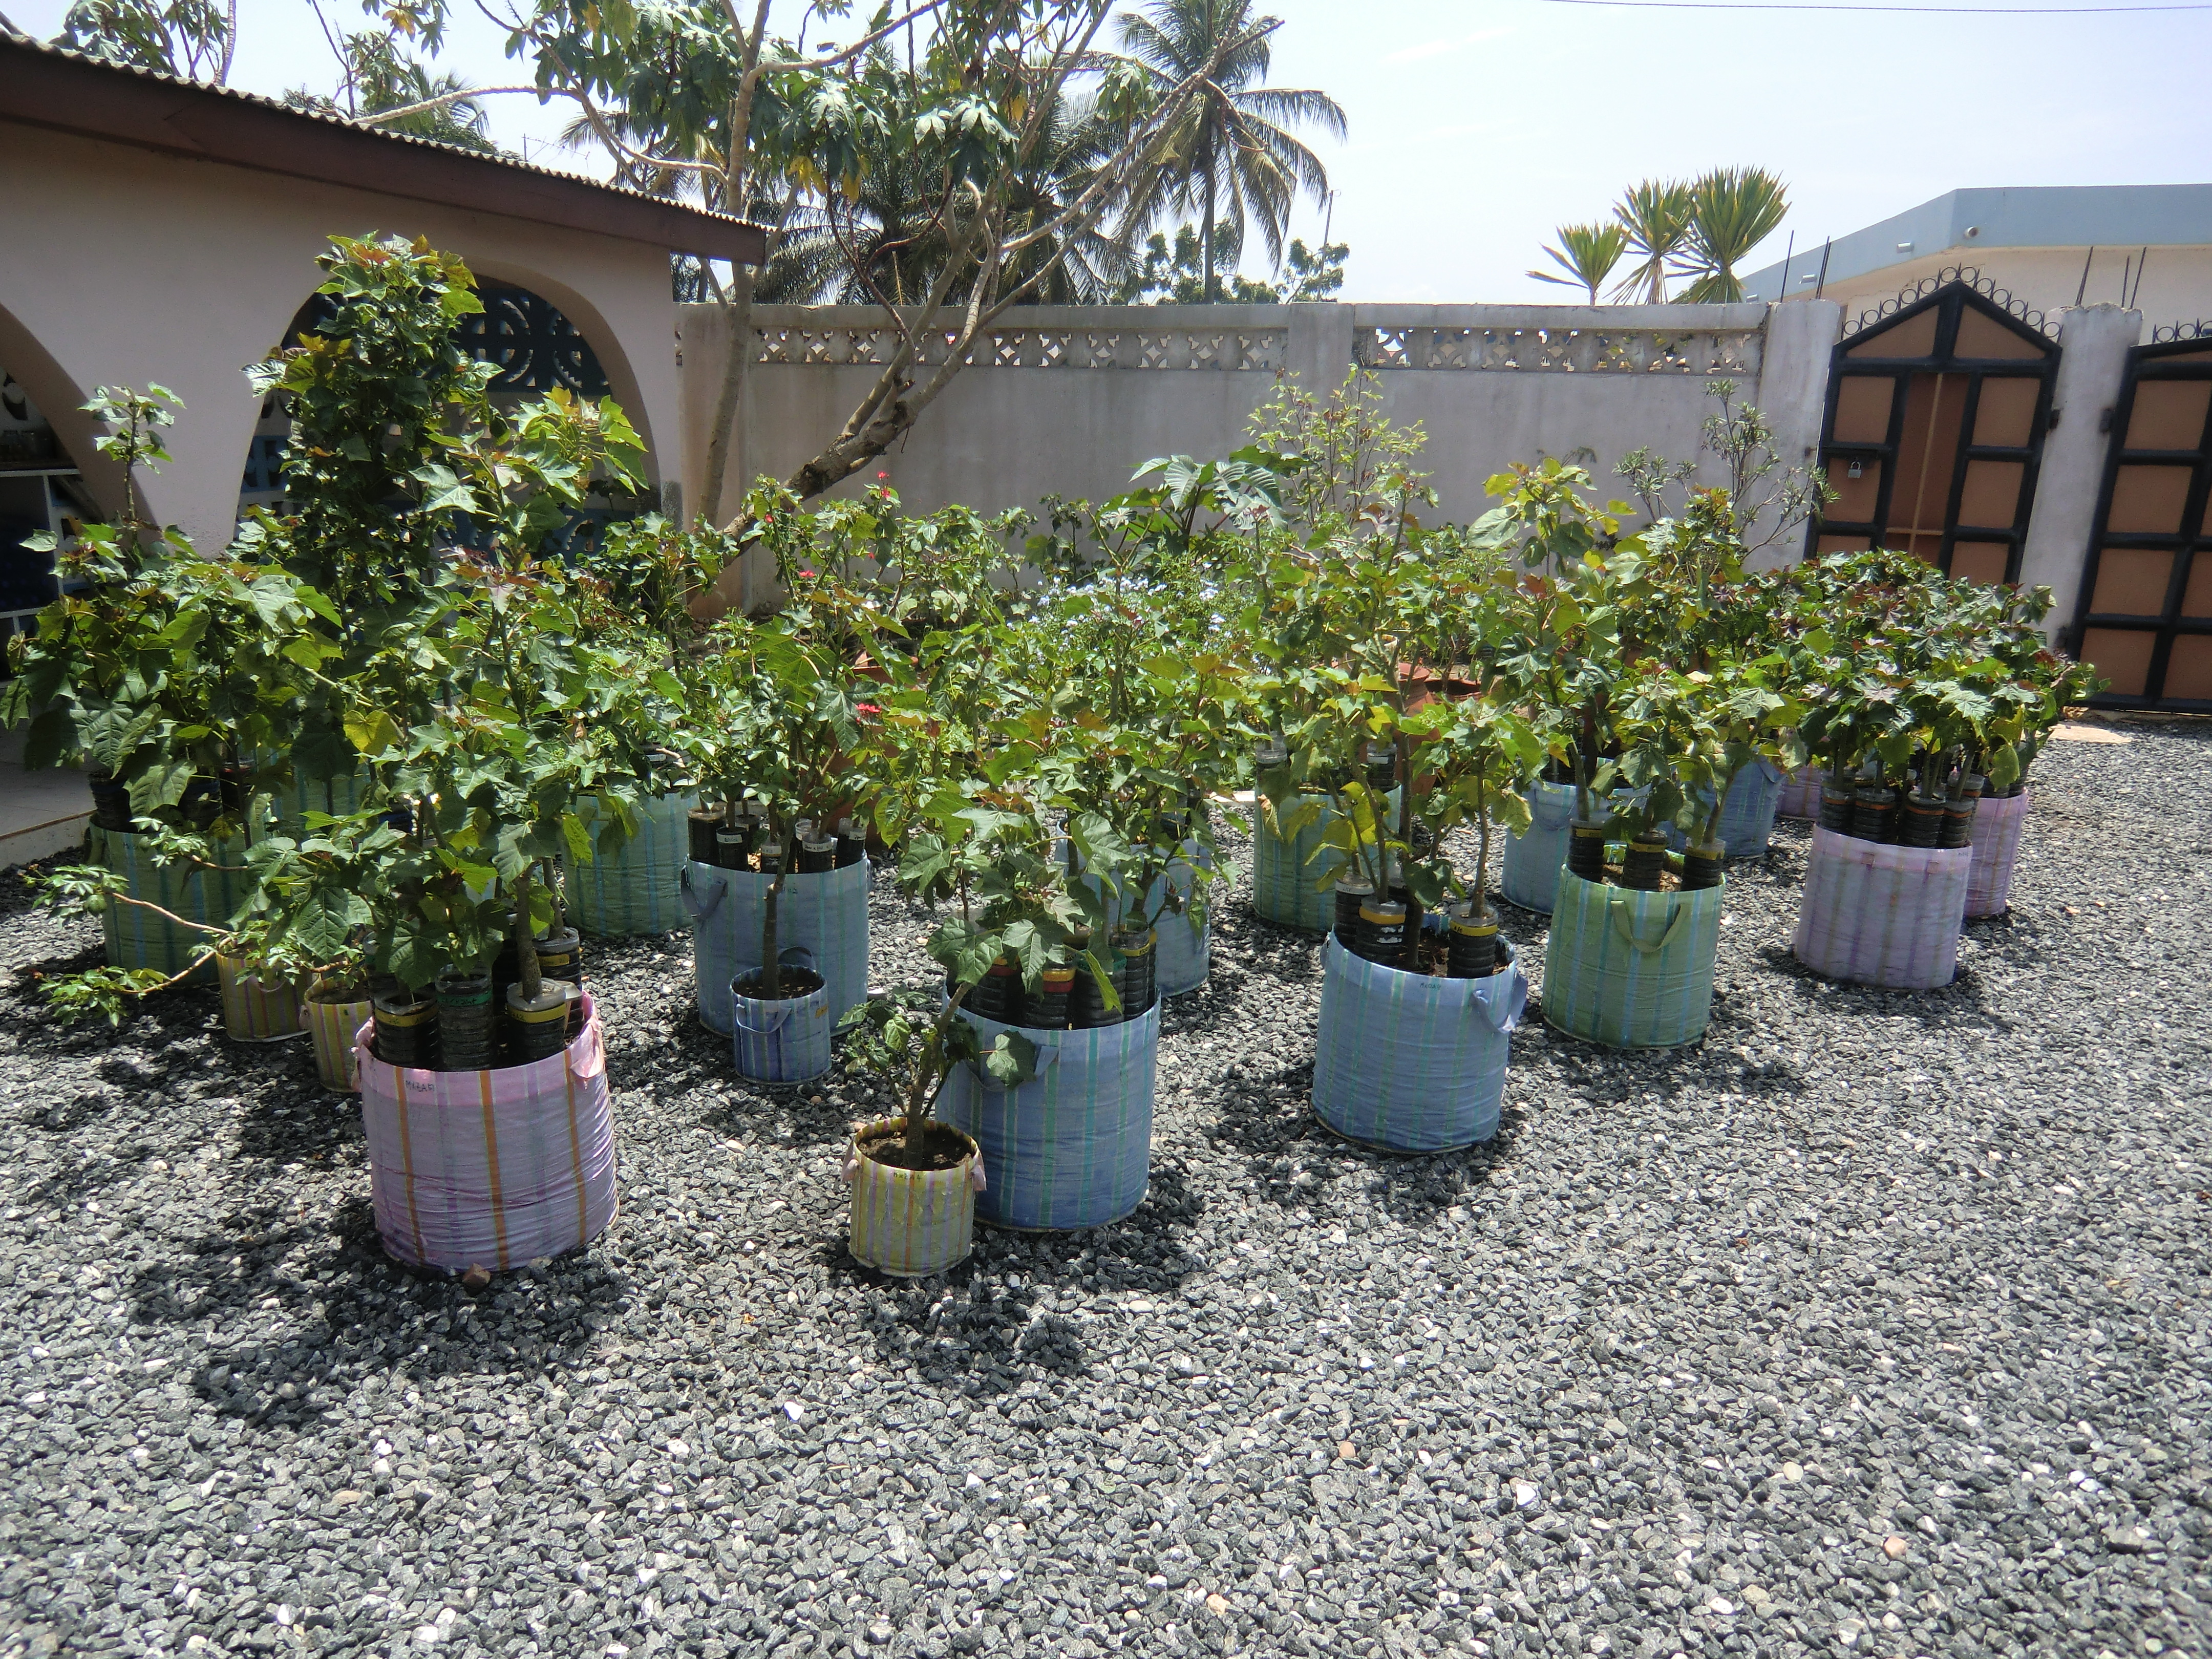 A section of the Bionic Palm Jatropha breeding orchard